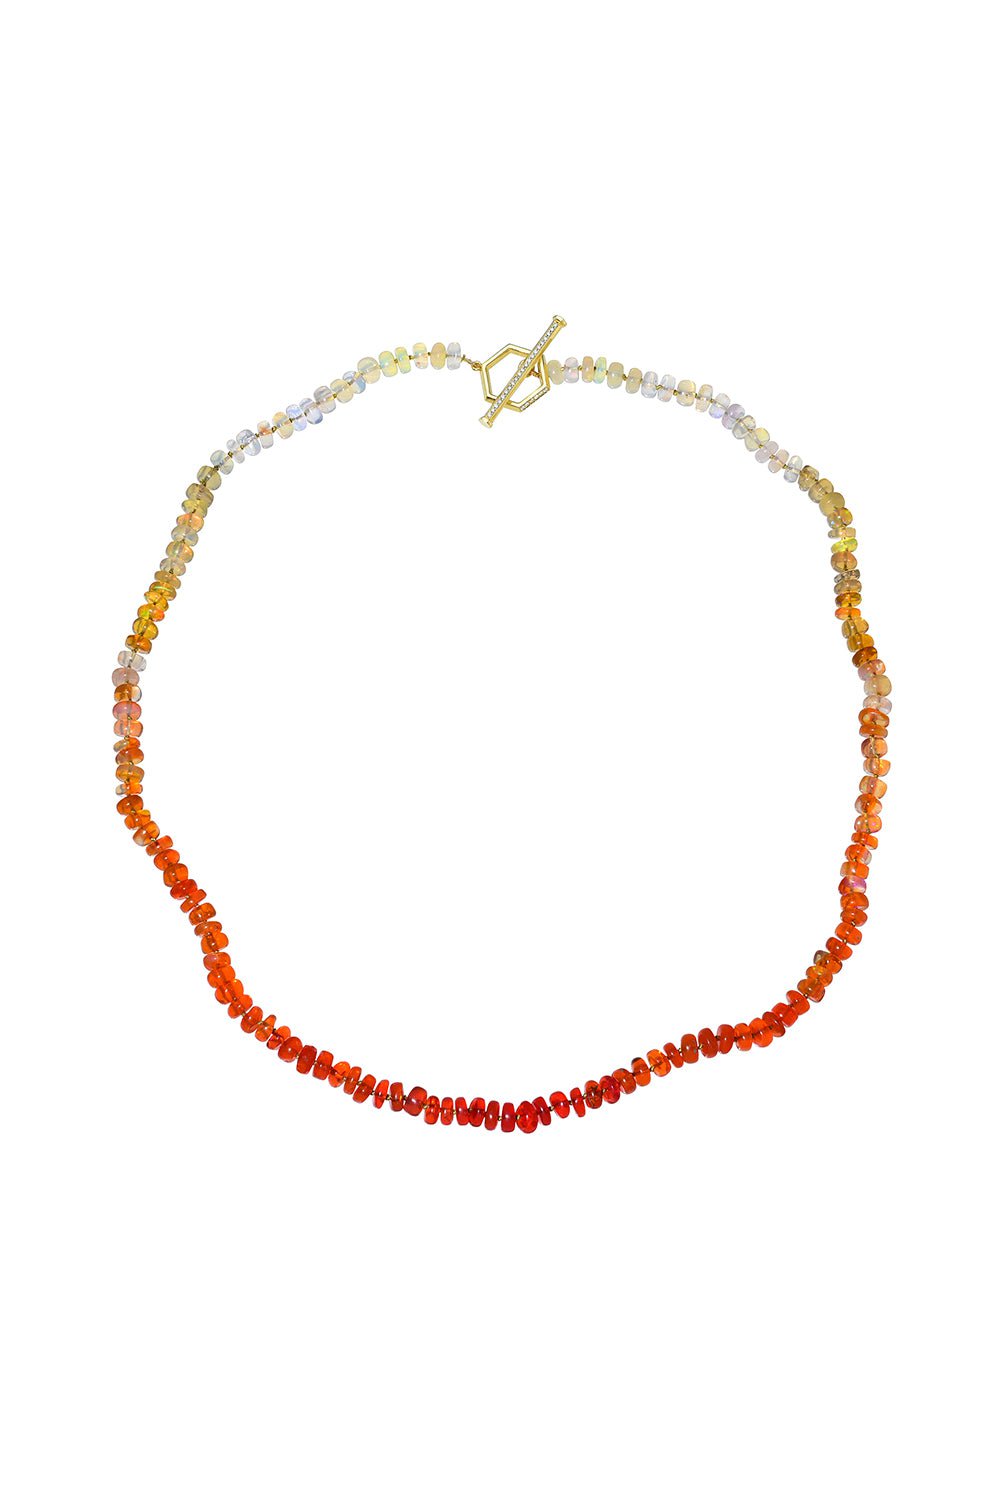 MEREDITH YOUNG-Fire Opal Bead Necklace-YELLOW GOLD